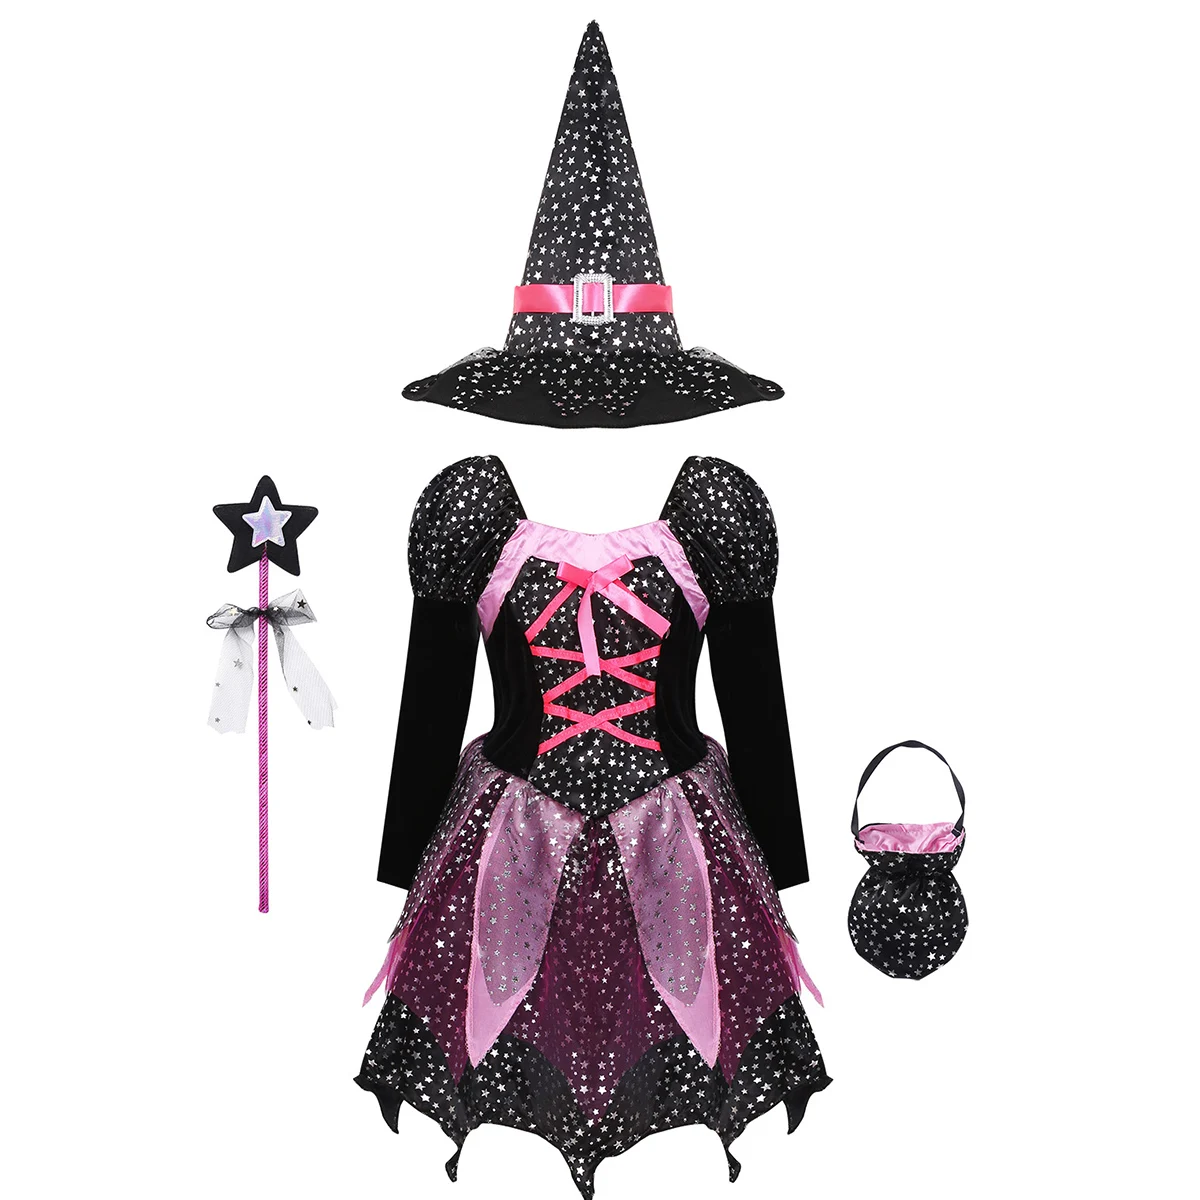 Kids Girl Princess Halloween Witch Costume Sparkly Silver Stars Print Dress Pointed Hat Wand Set Carnival Cosplay Party Dress Up